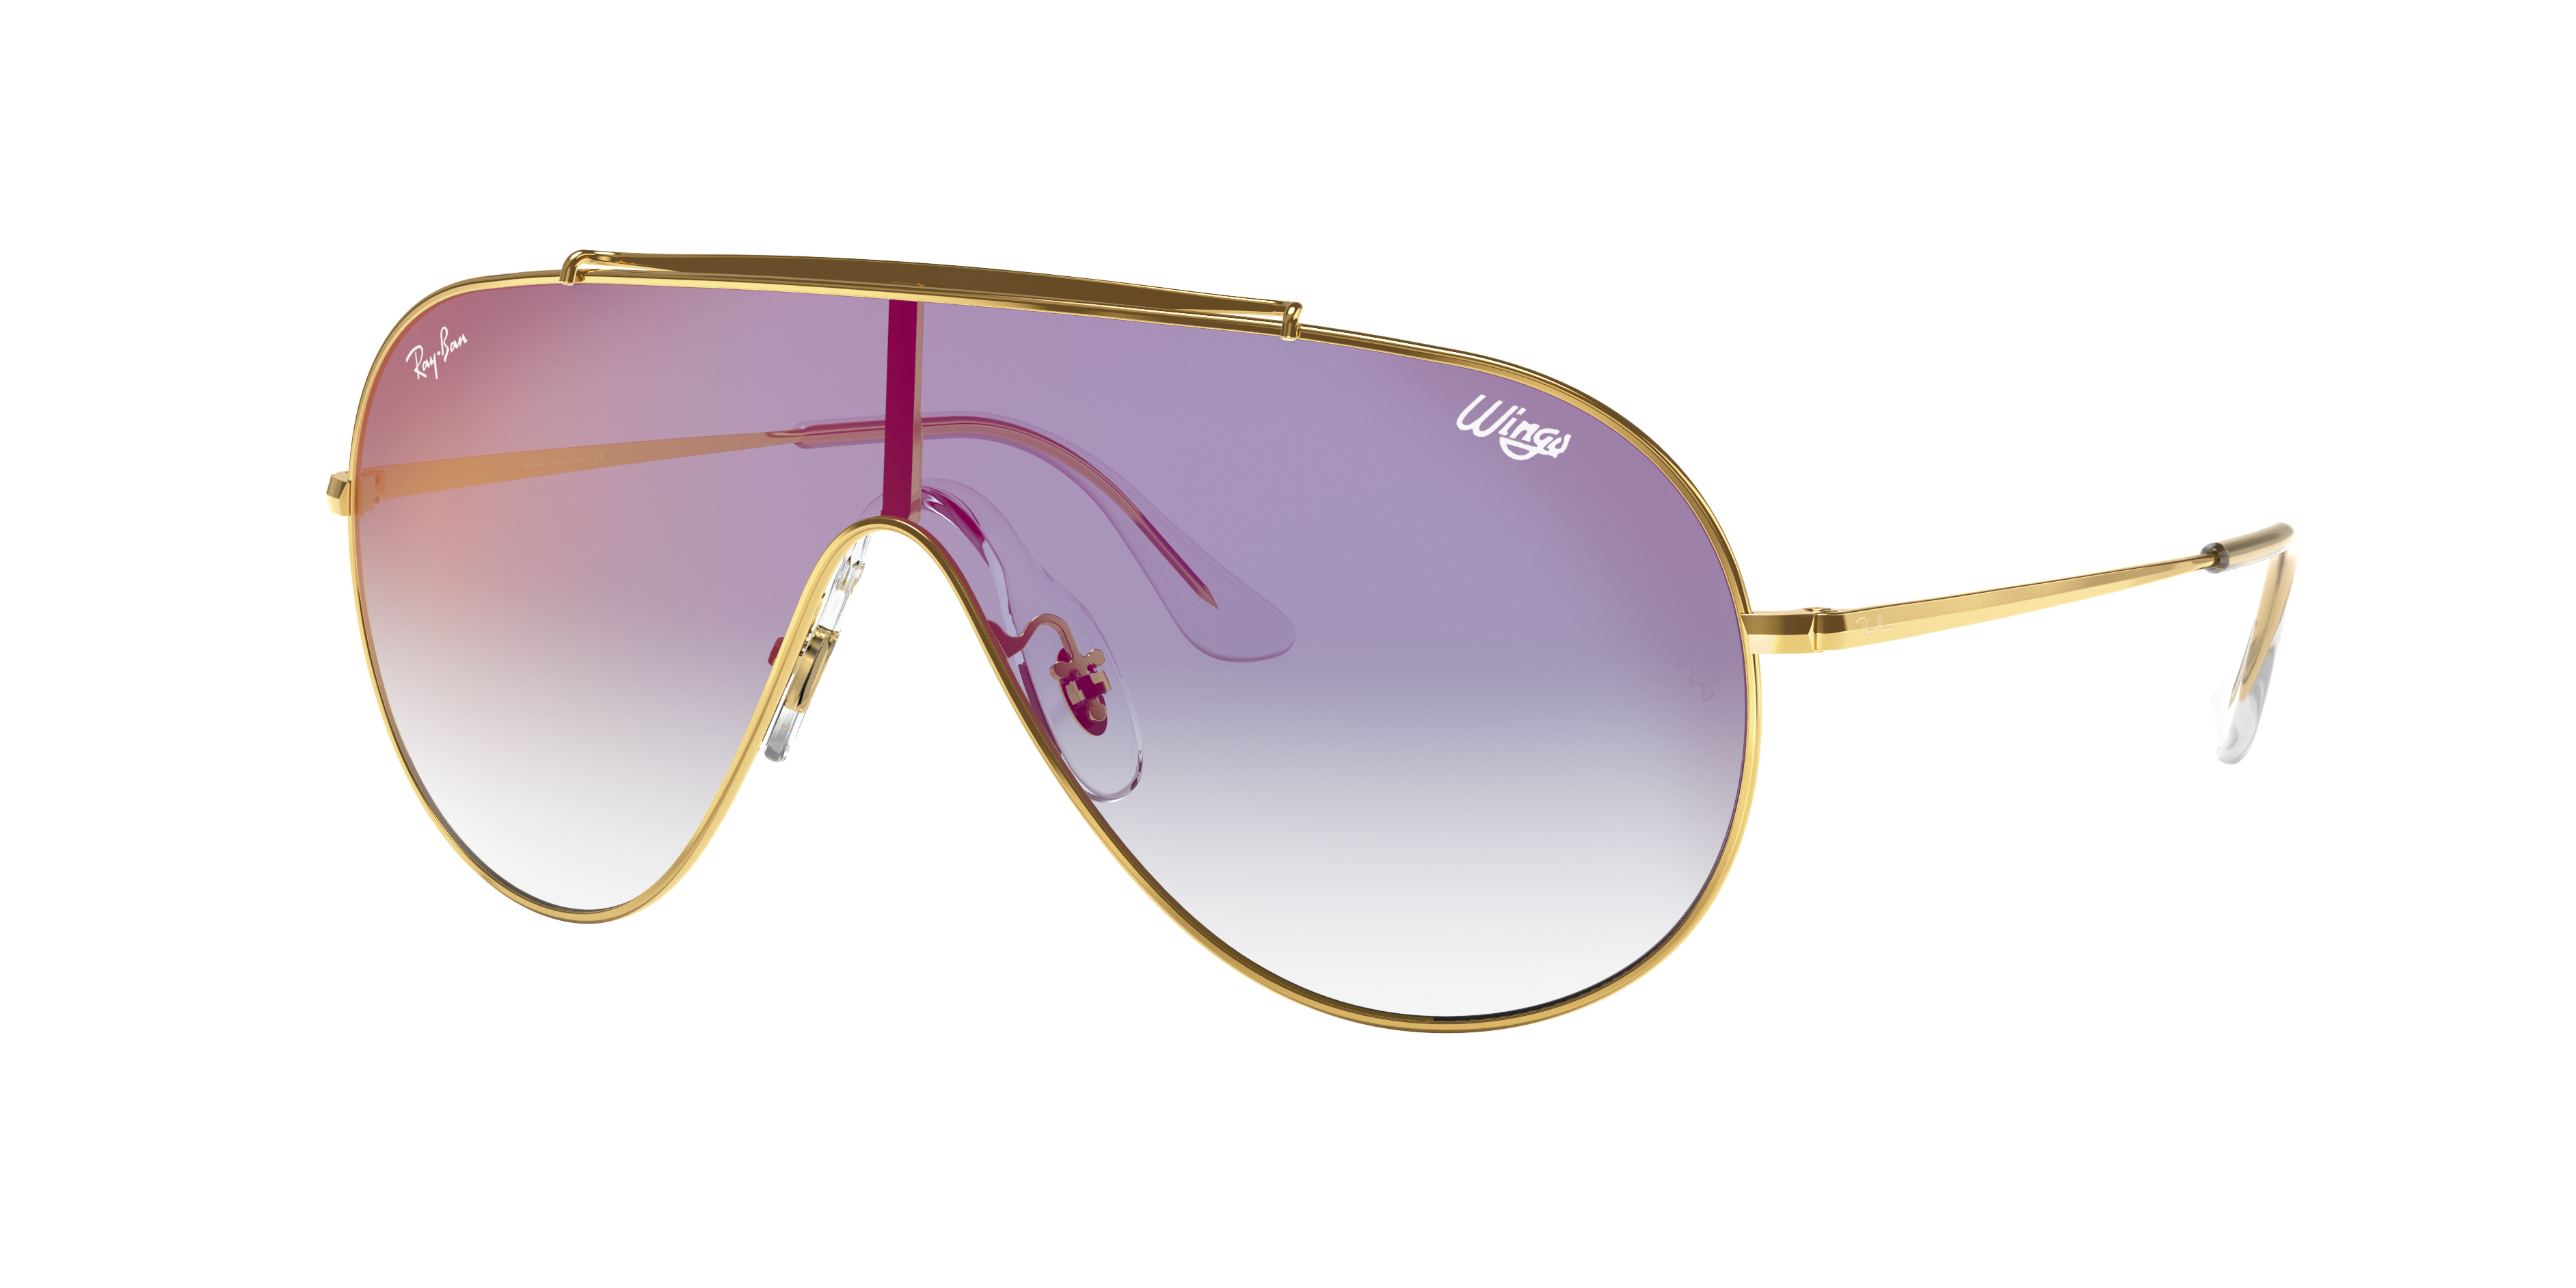 Wings Sunglasses in Gold and Blue | Ray-Ban®